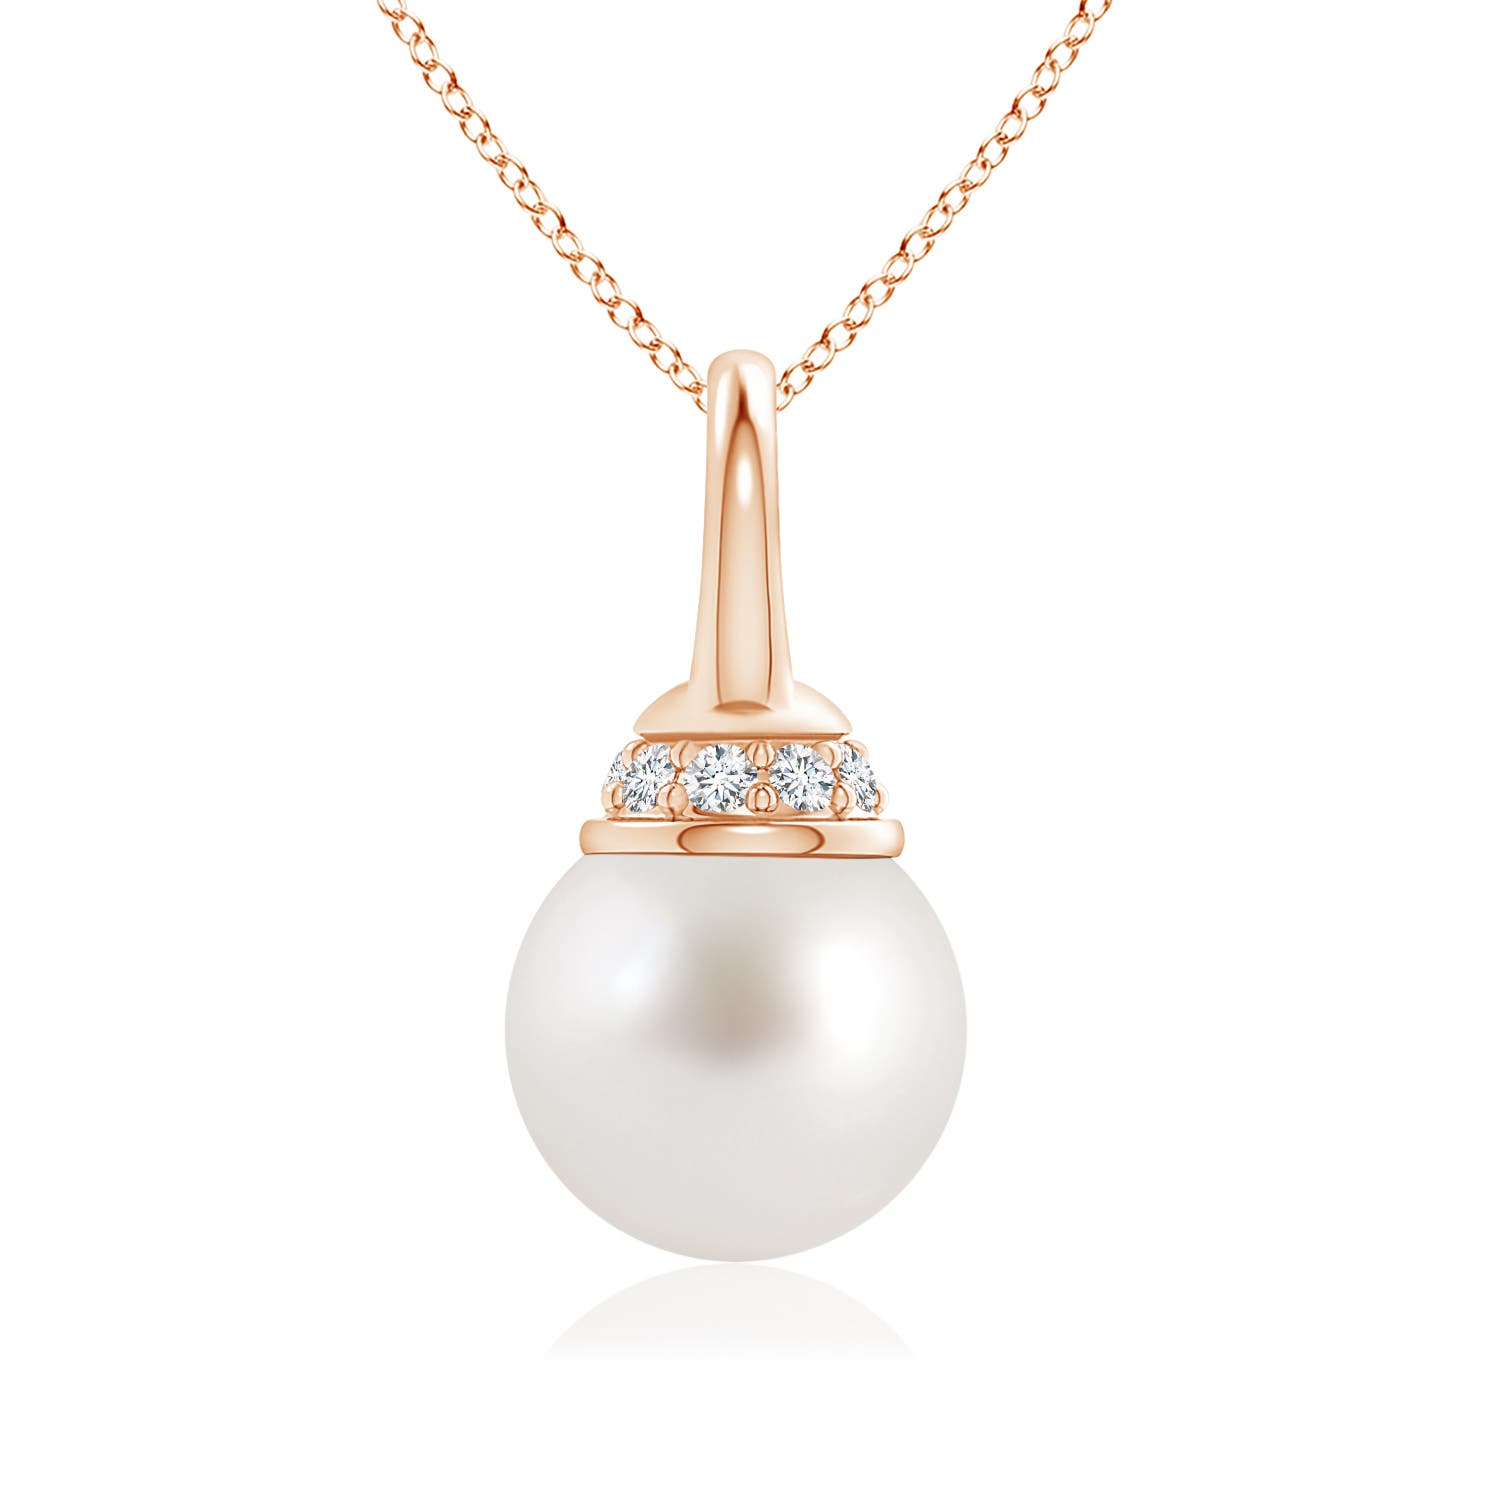 AAA - South Sea Cultured Pearl / 3.79 CT / 14 KT Rose Gold